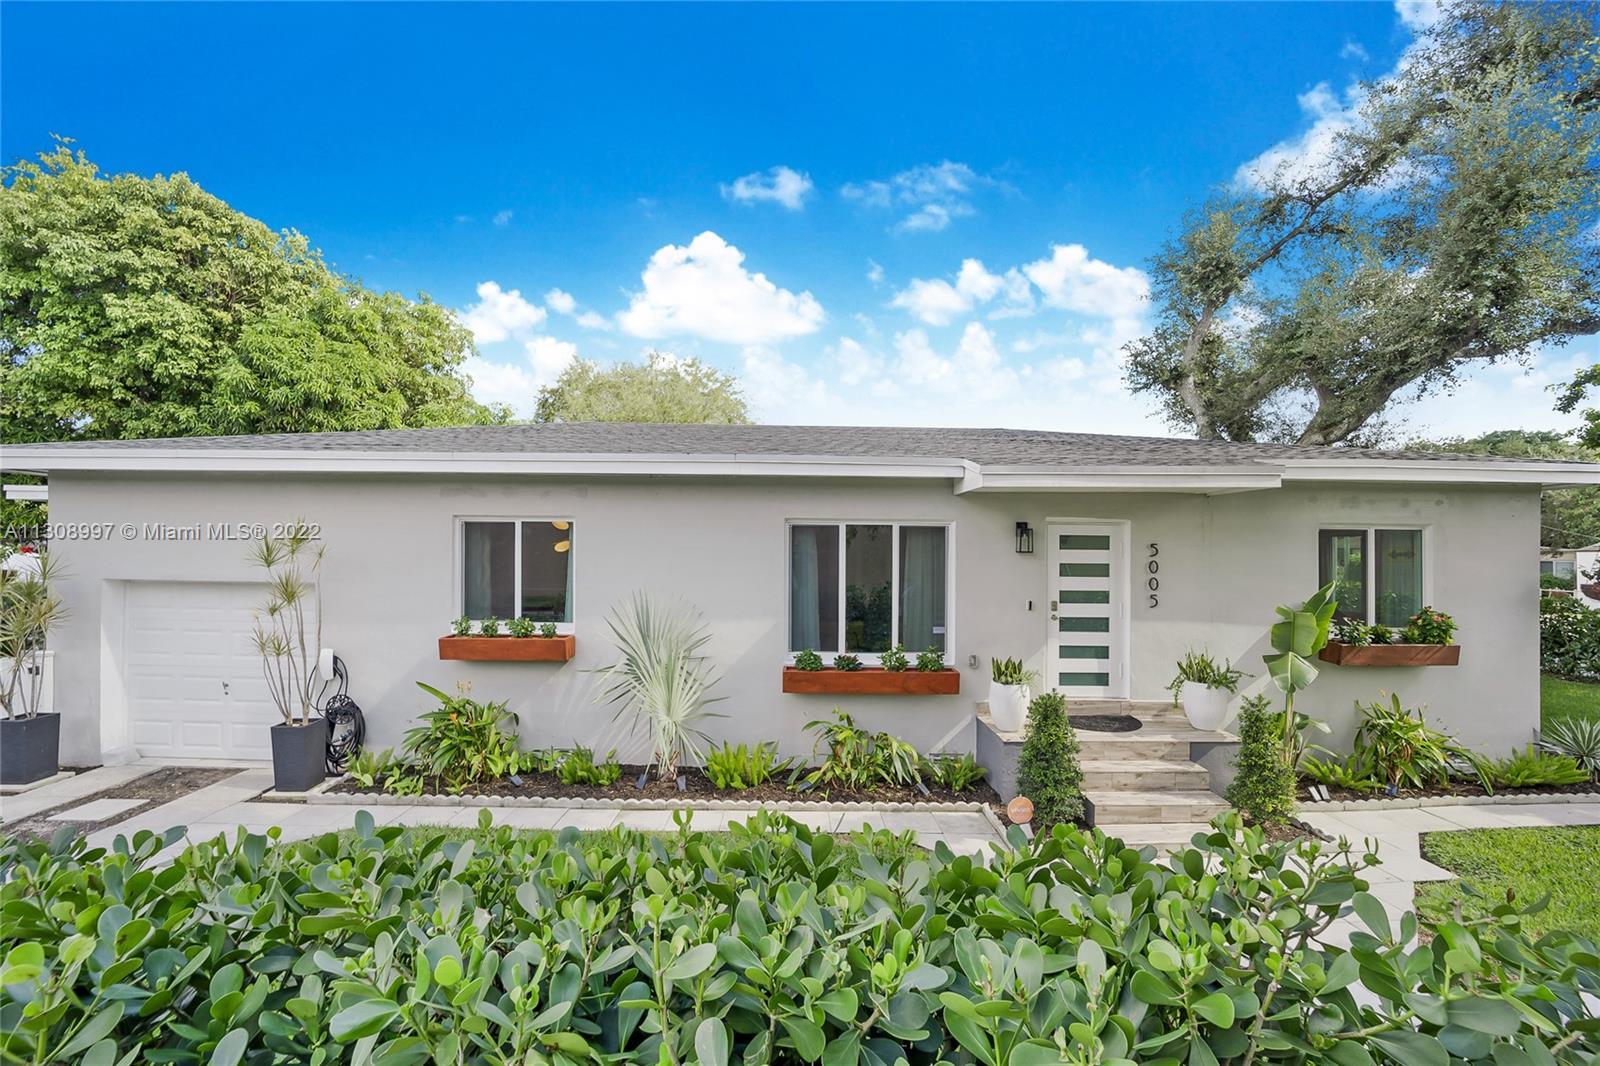 Photo of 5005 NW 6th Ave in Miami, FL